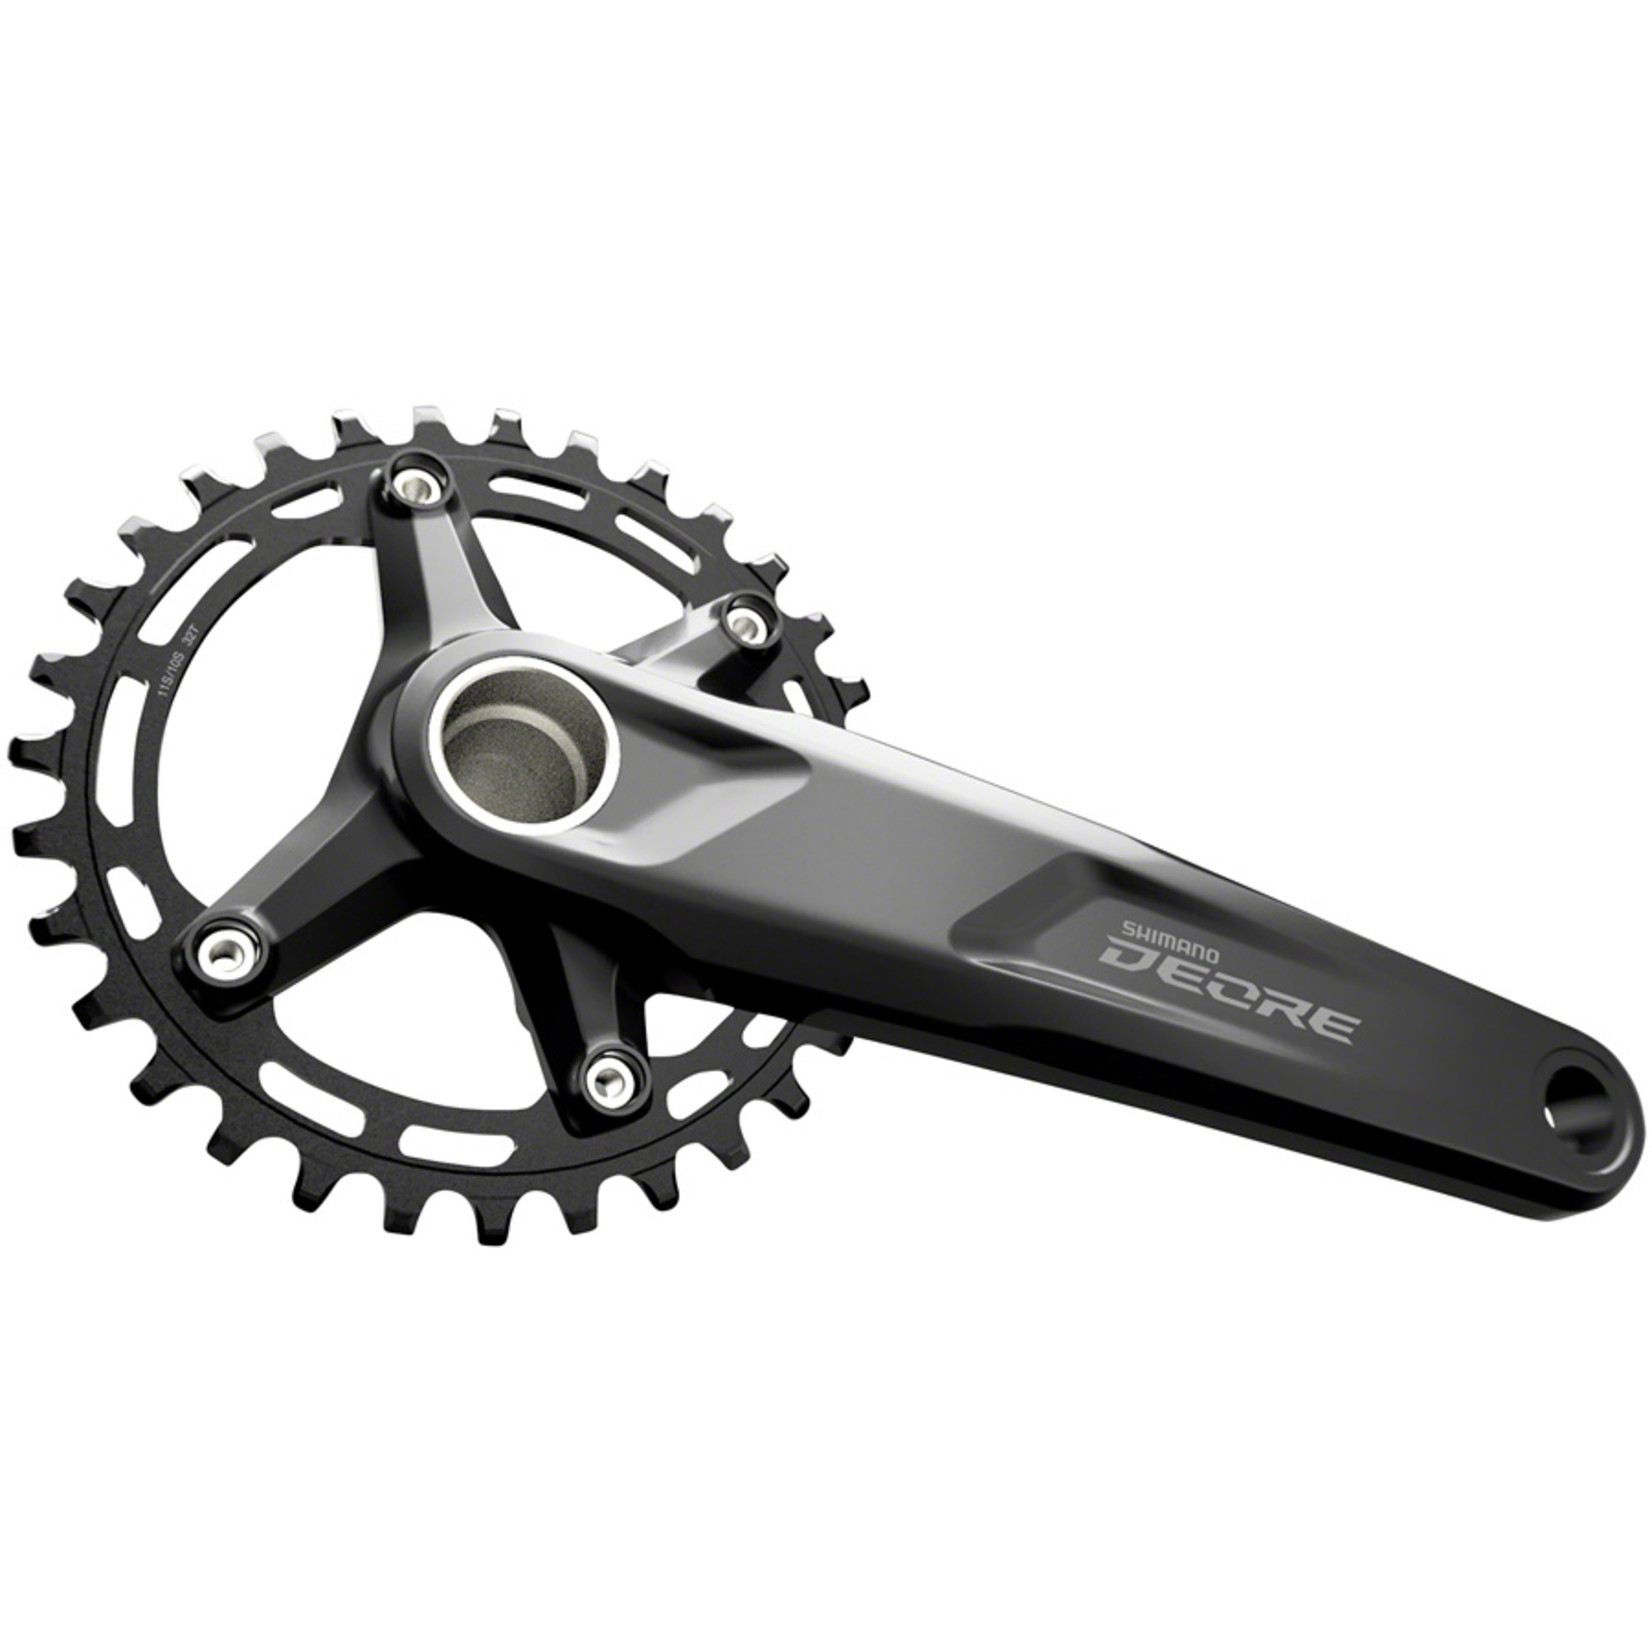 Shimano Shimano Deore FC-M5100-1 Crankset - 175mm 10/11-Speed 32t 96 BCD Hollowtech II Spindle Interface Black